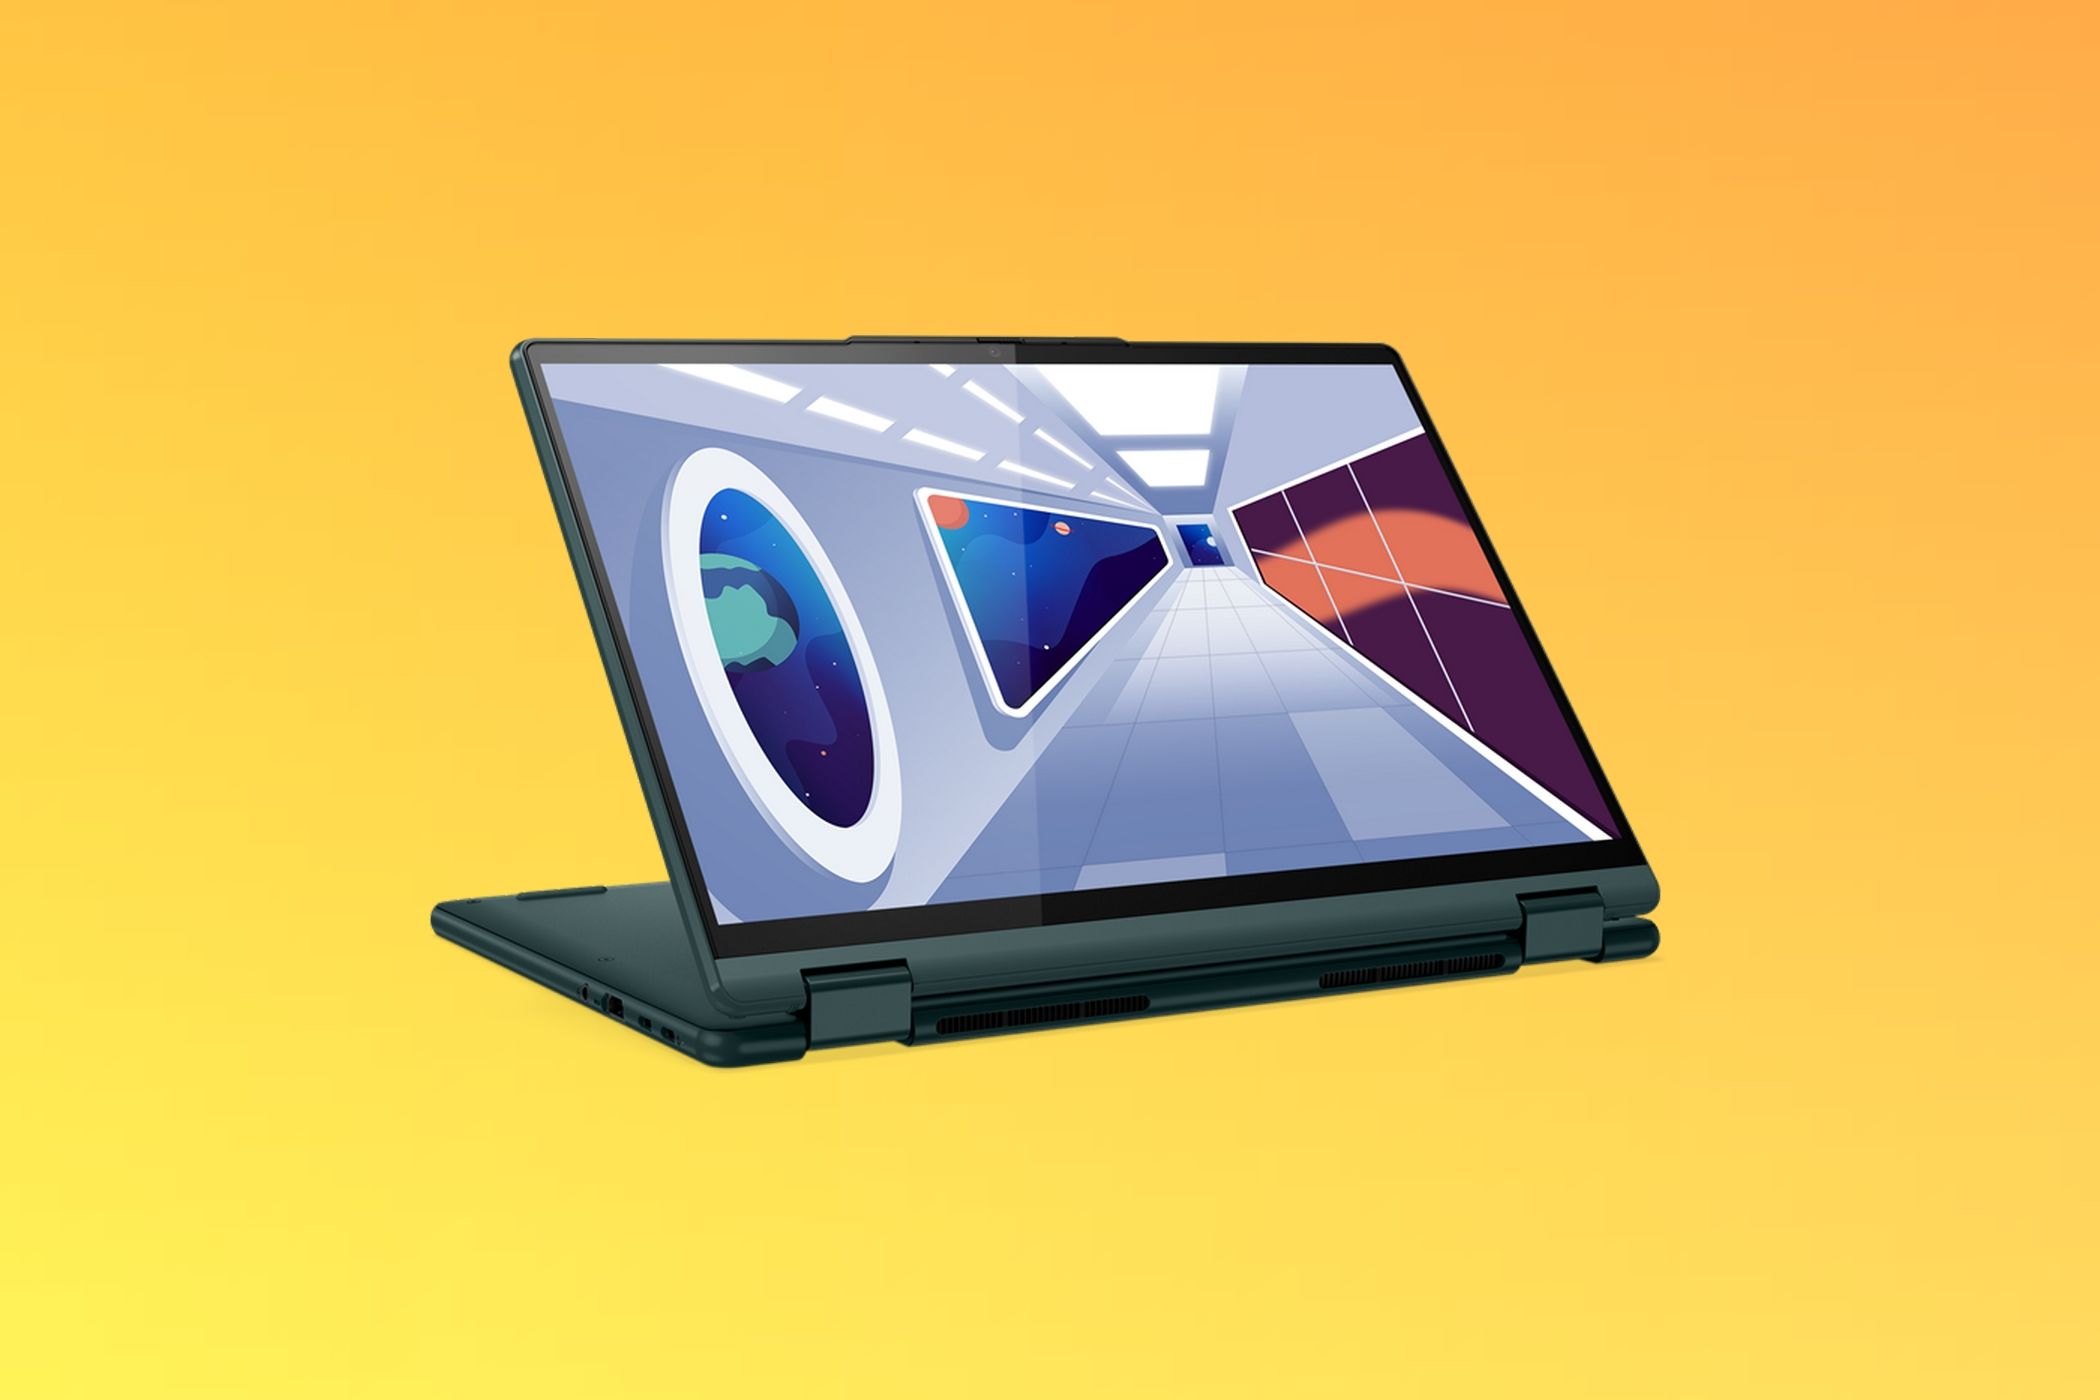 Angled front view of the Lenovo Yoga 6 in stand mode and facing slightly right. The laptop is laid over a yellow and orange gradient background.